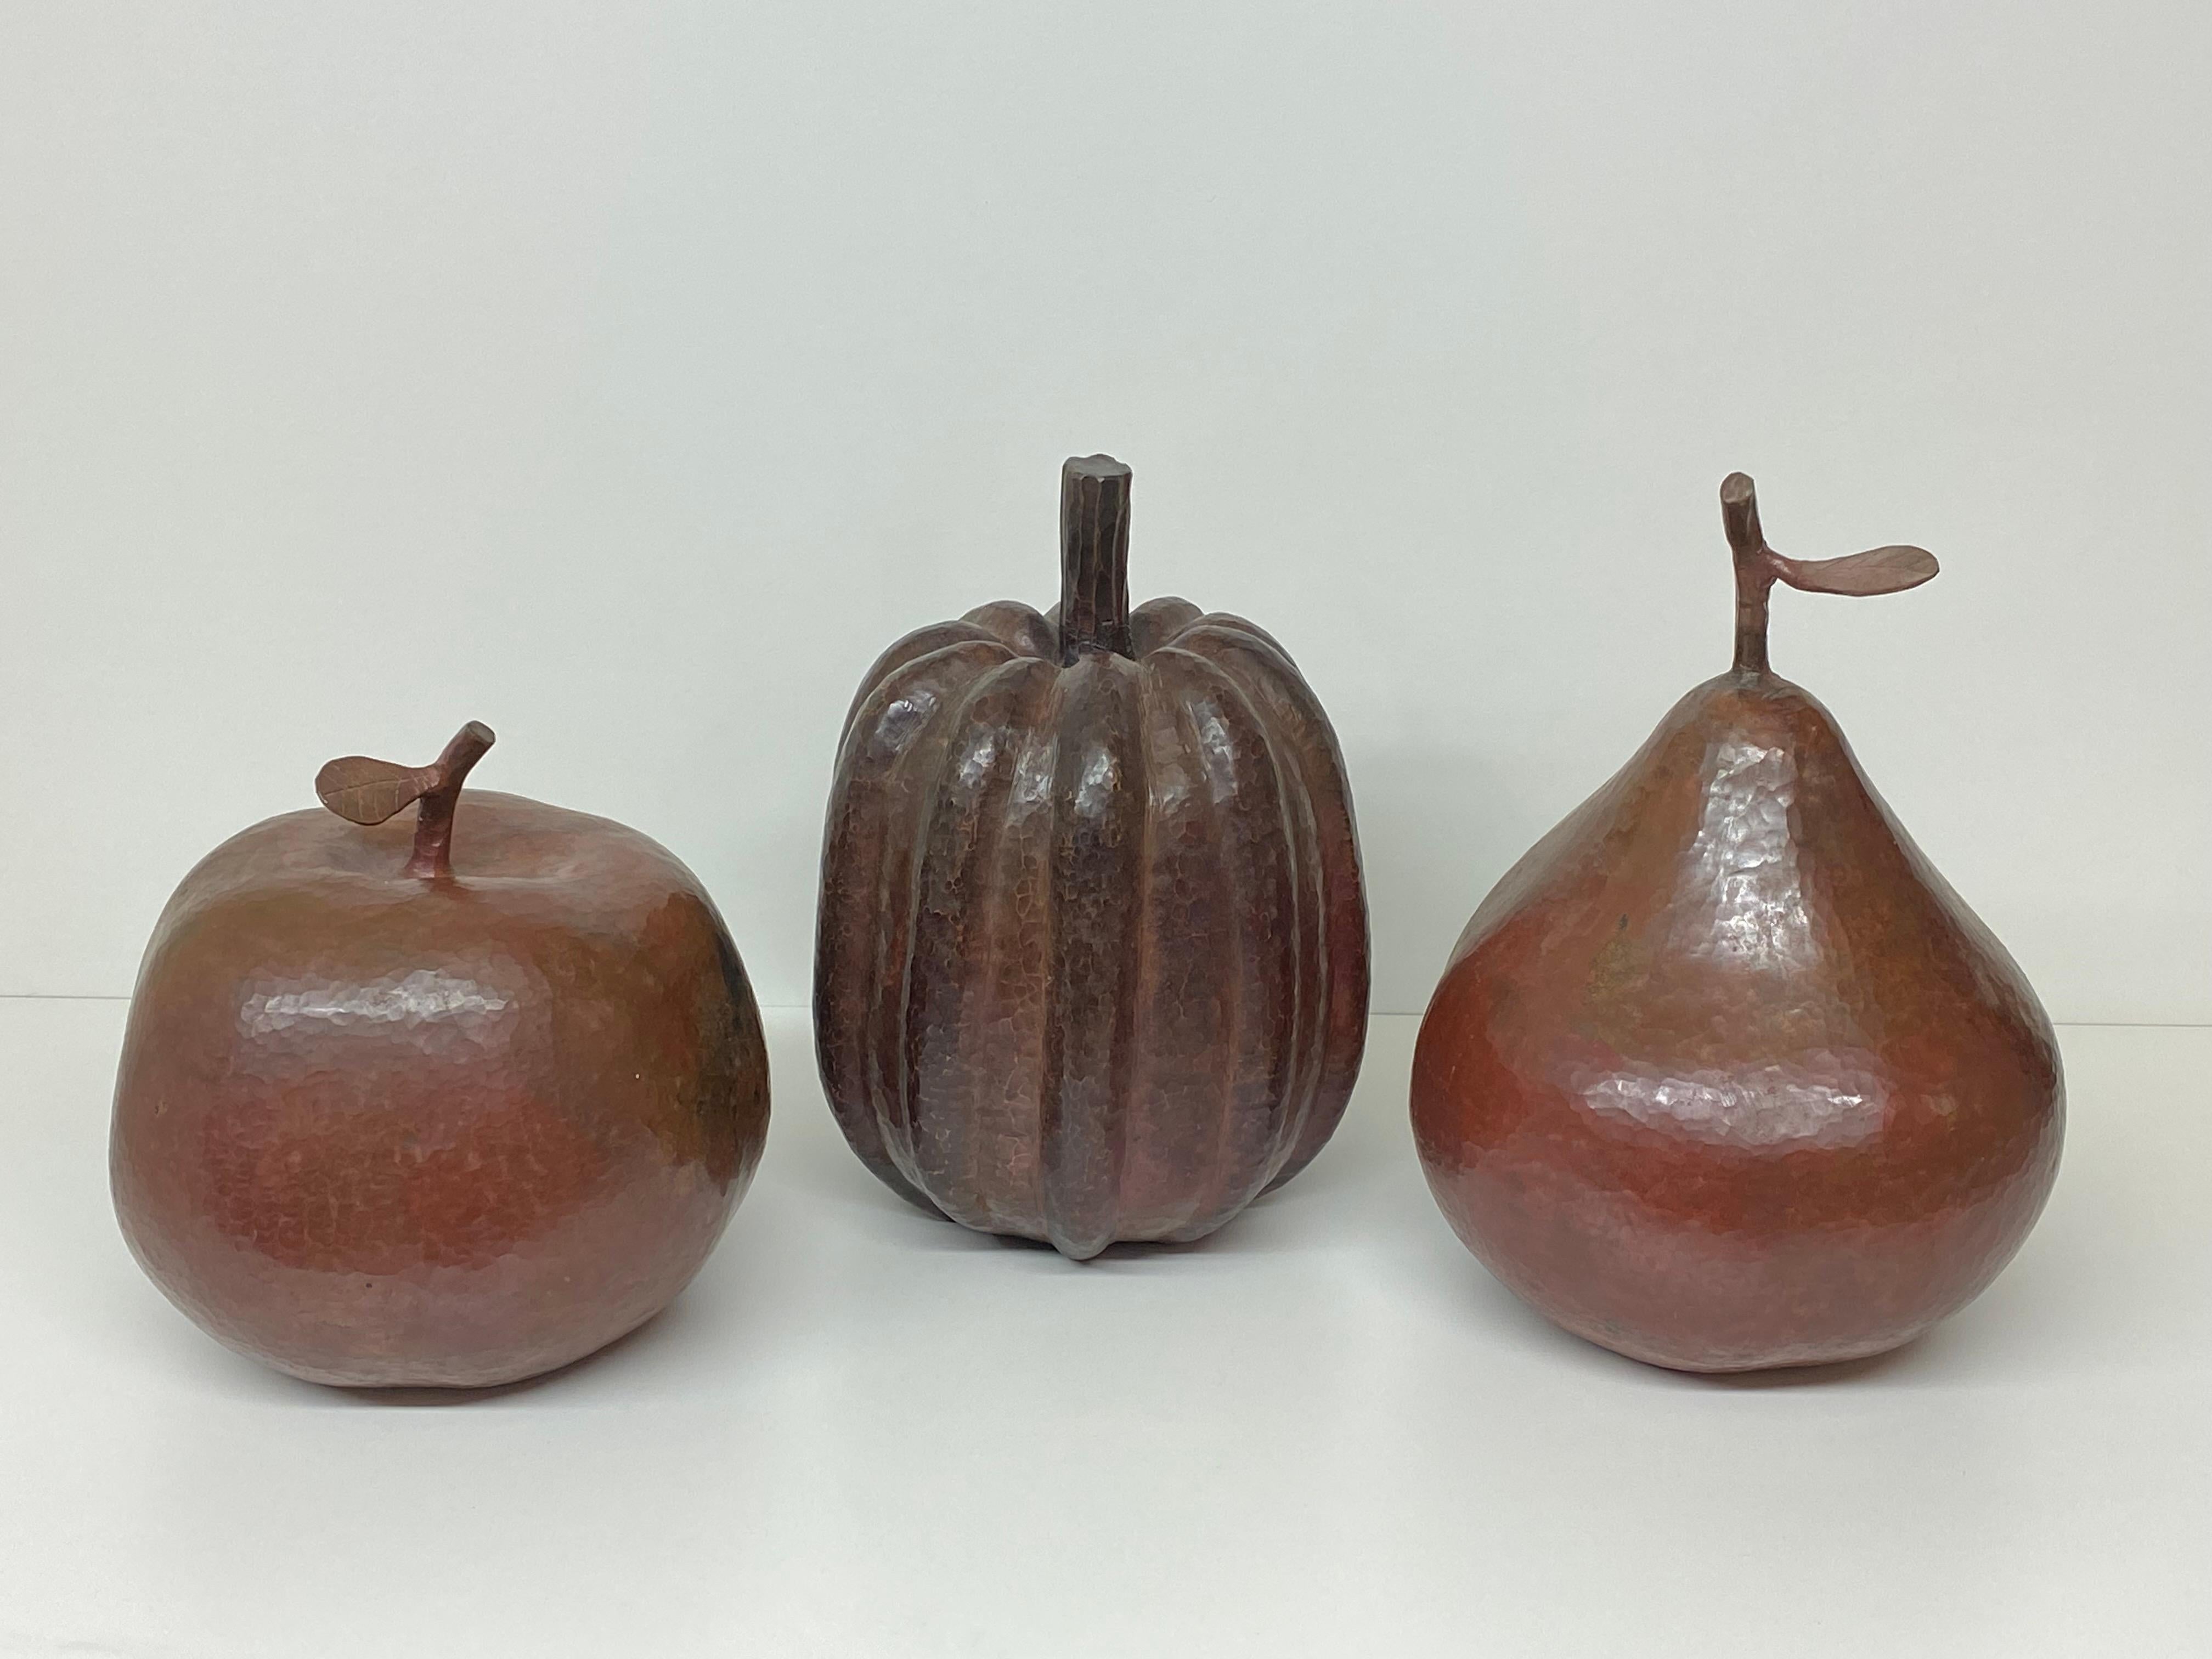 Set of three decorative hammered copper apple, pear and pumpkin sculptures in the style of Robert Kuo. Apple is 8